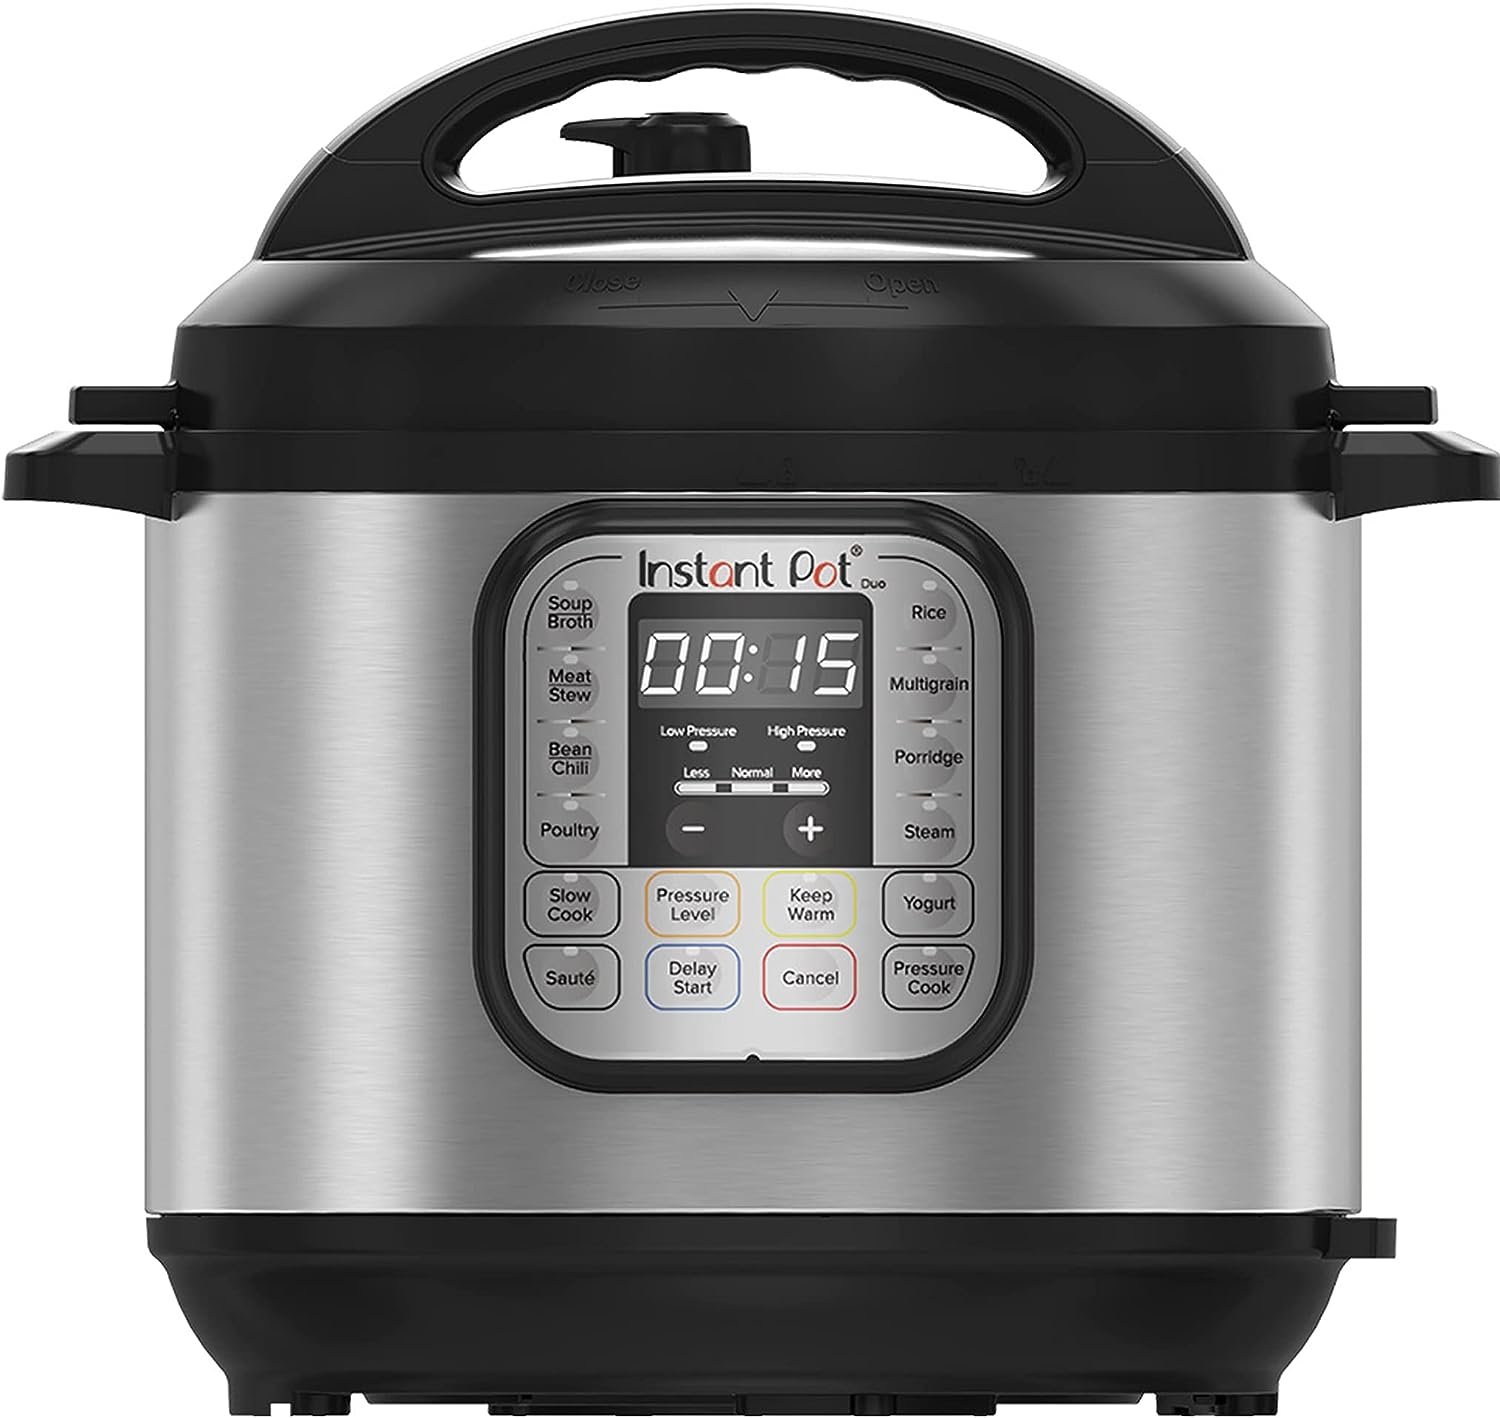 Instant Pot DUO 60 Duo 7-in-1 Smart Cooker Review | Welcome to HiTech ...